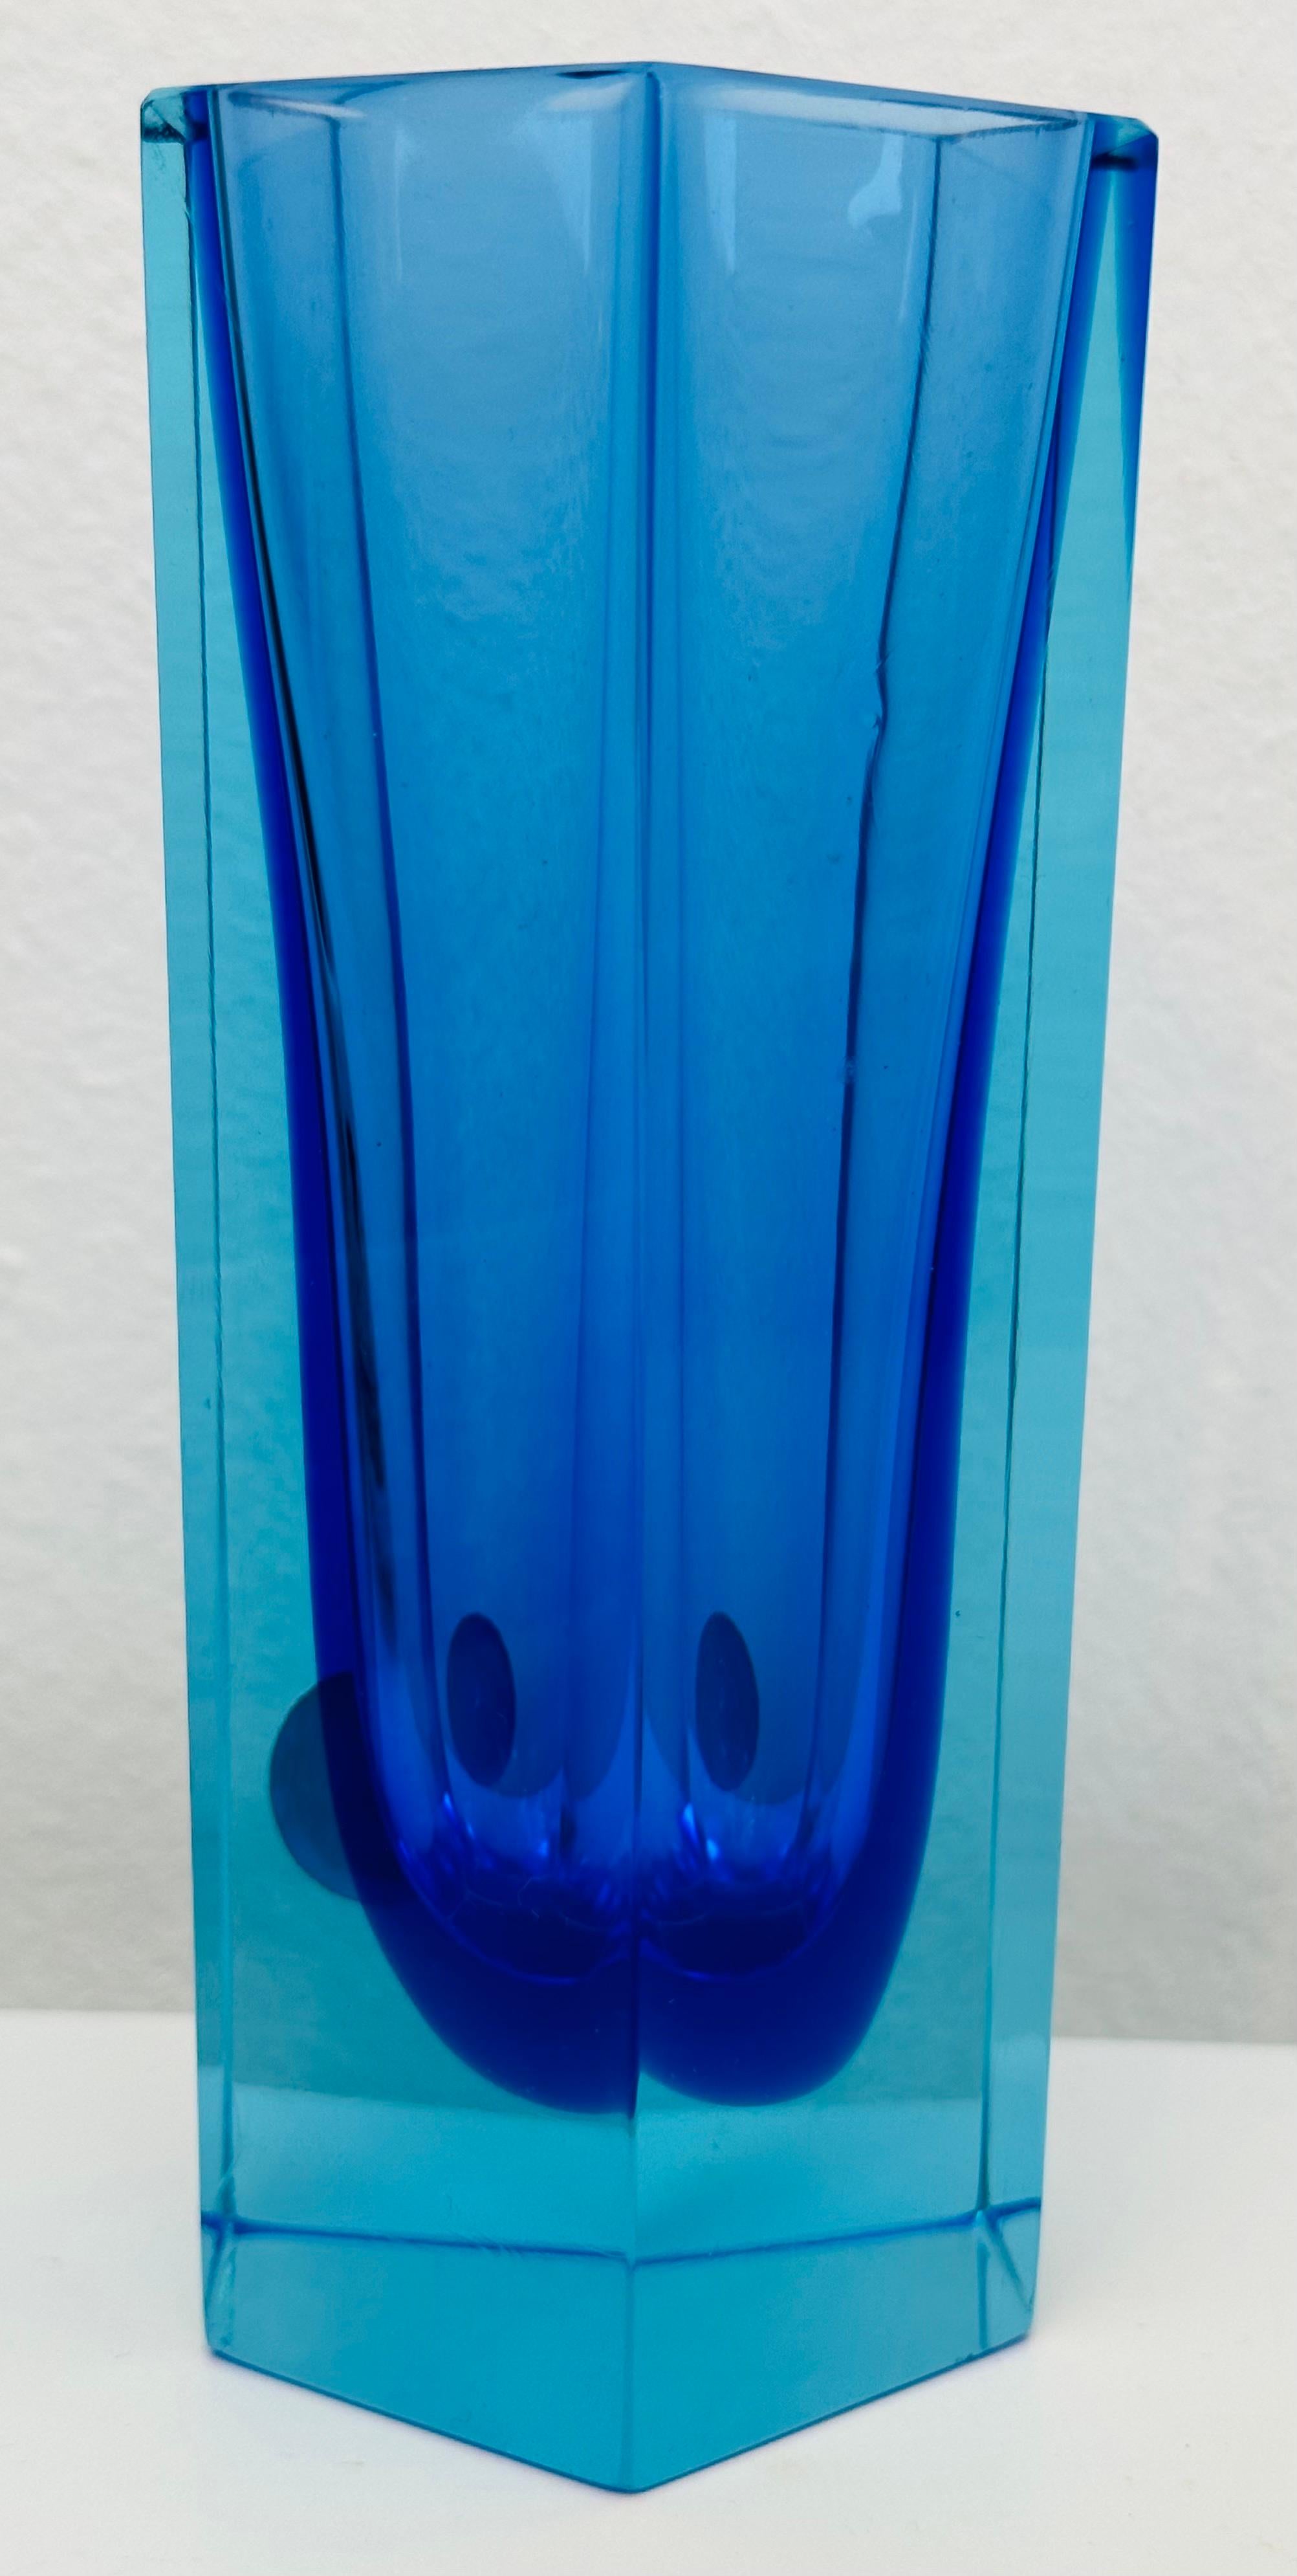 Art Glass Small 1970s Mid Century Italian Murano Blue & Turquoise Sommerso Glass Vase For Sale